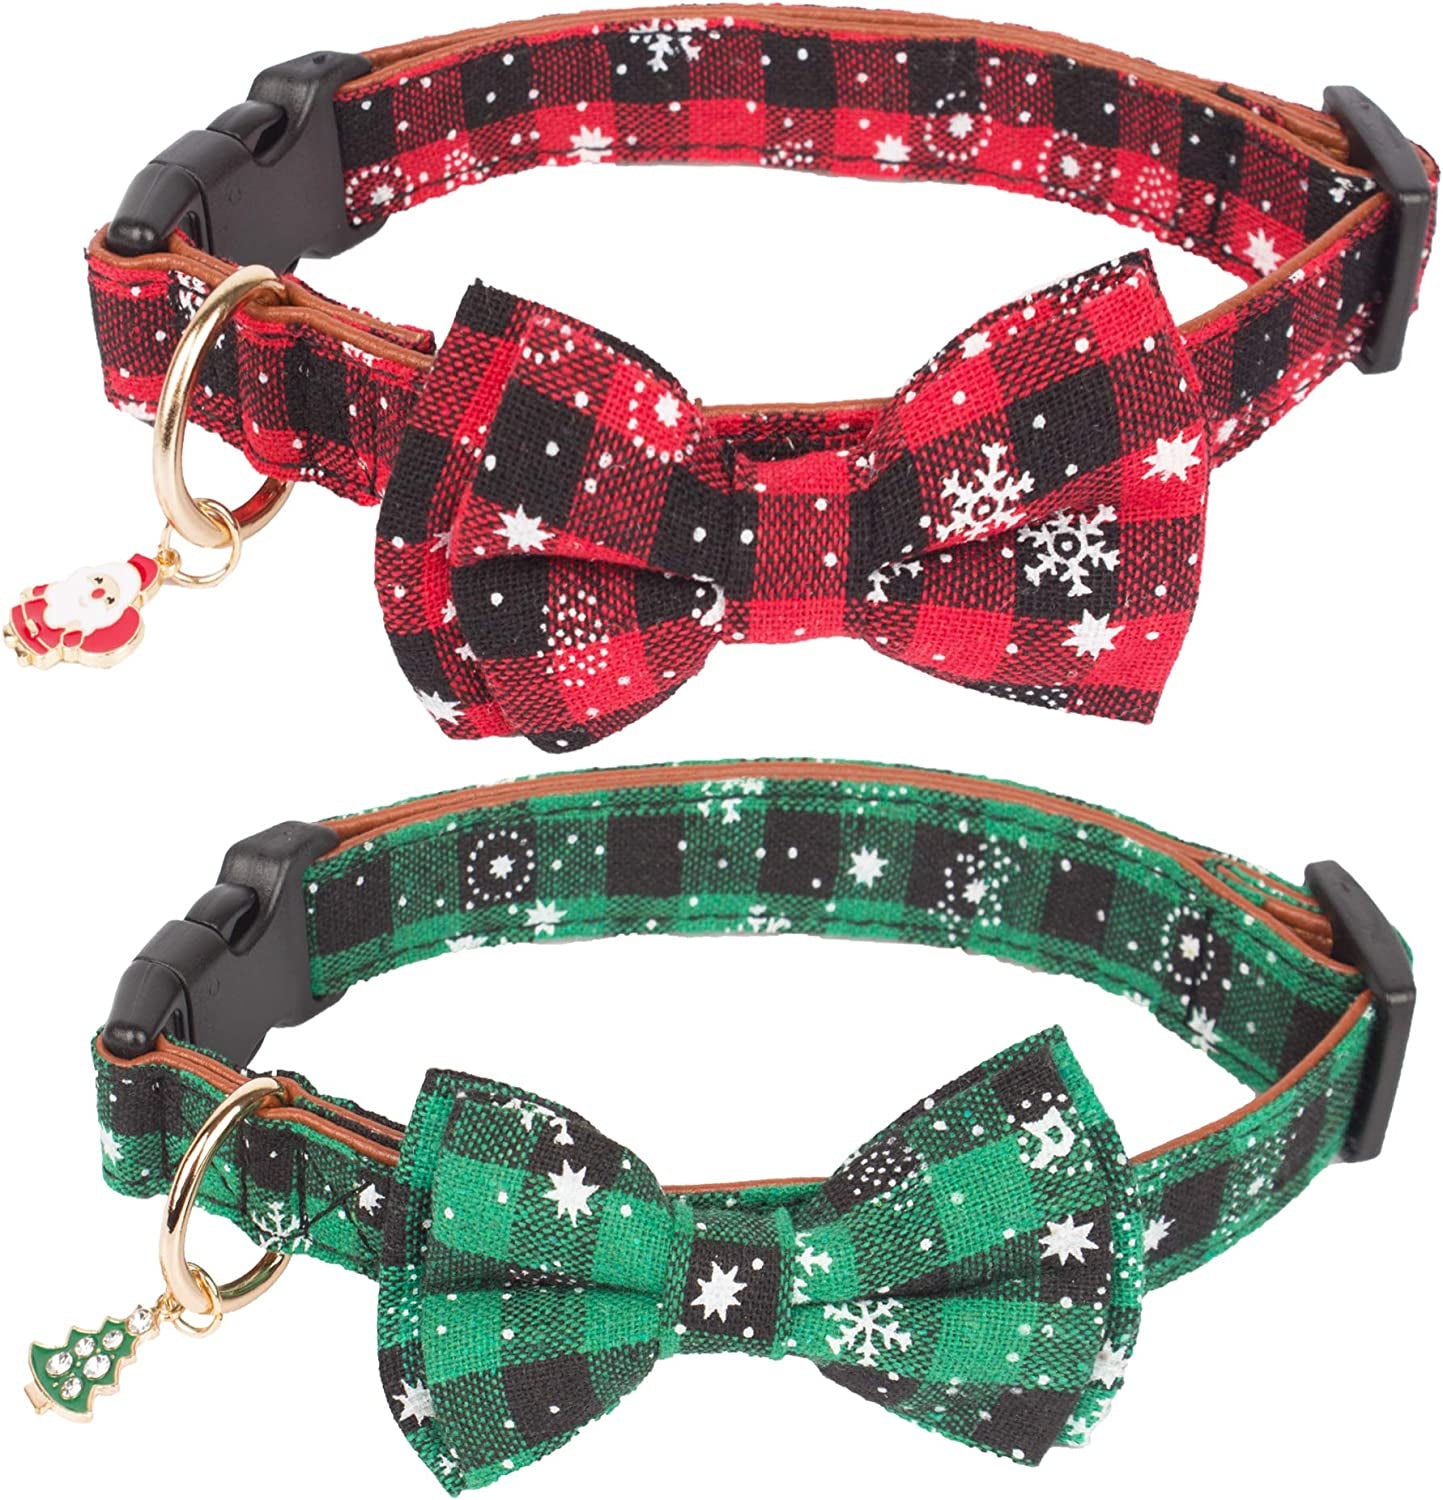 ADOGGYGO Christmas Dog Collar with Bow Tie Adjustable Bowtie Plaid Red Green Dog Pet Collars for Small Medium Large Dogs (Small, Red&Green&White) Animals & Pet Supplies > Pet Supplies > Dog Supplies > Dog Apparel ADOGGYGO Red&Green&White Large 